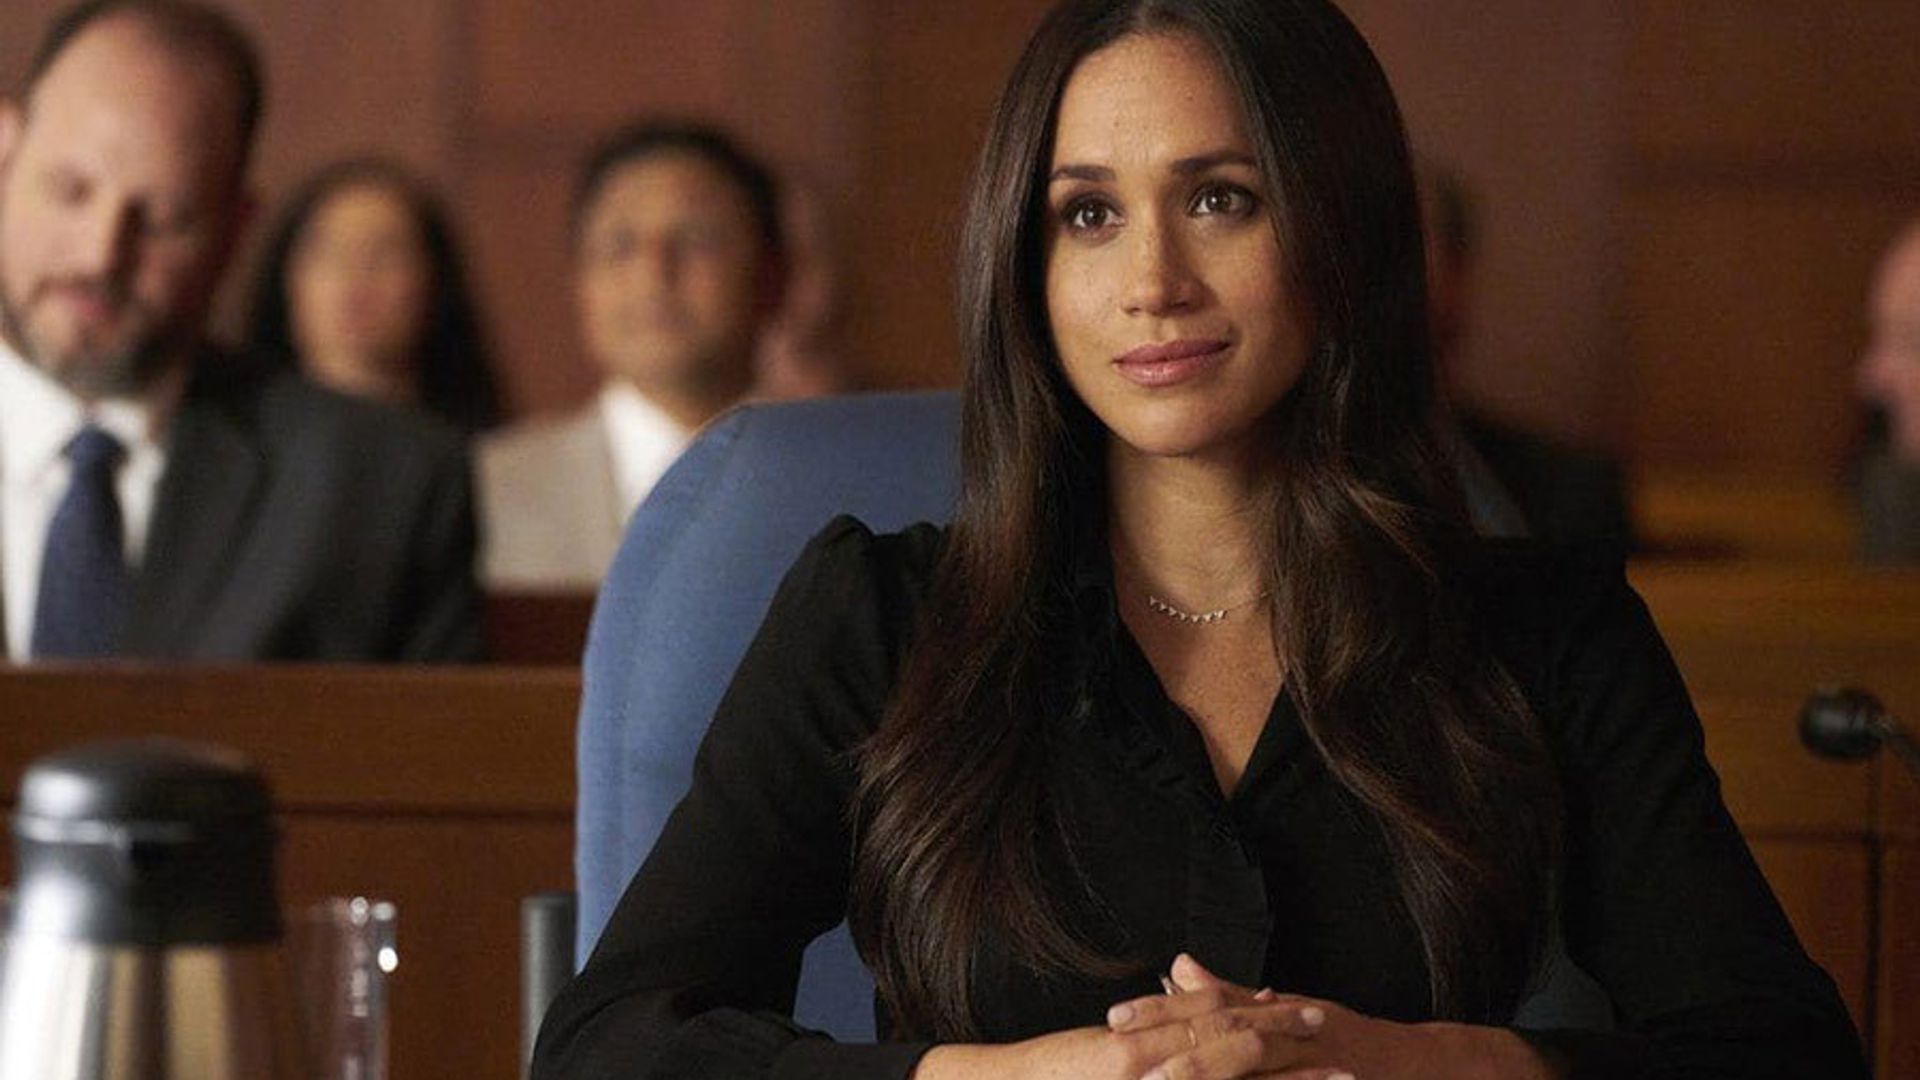 ‘Suits’ says goodbye with hilarious joke about Duchess Meghan and Prince Harry’s romance in its finale